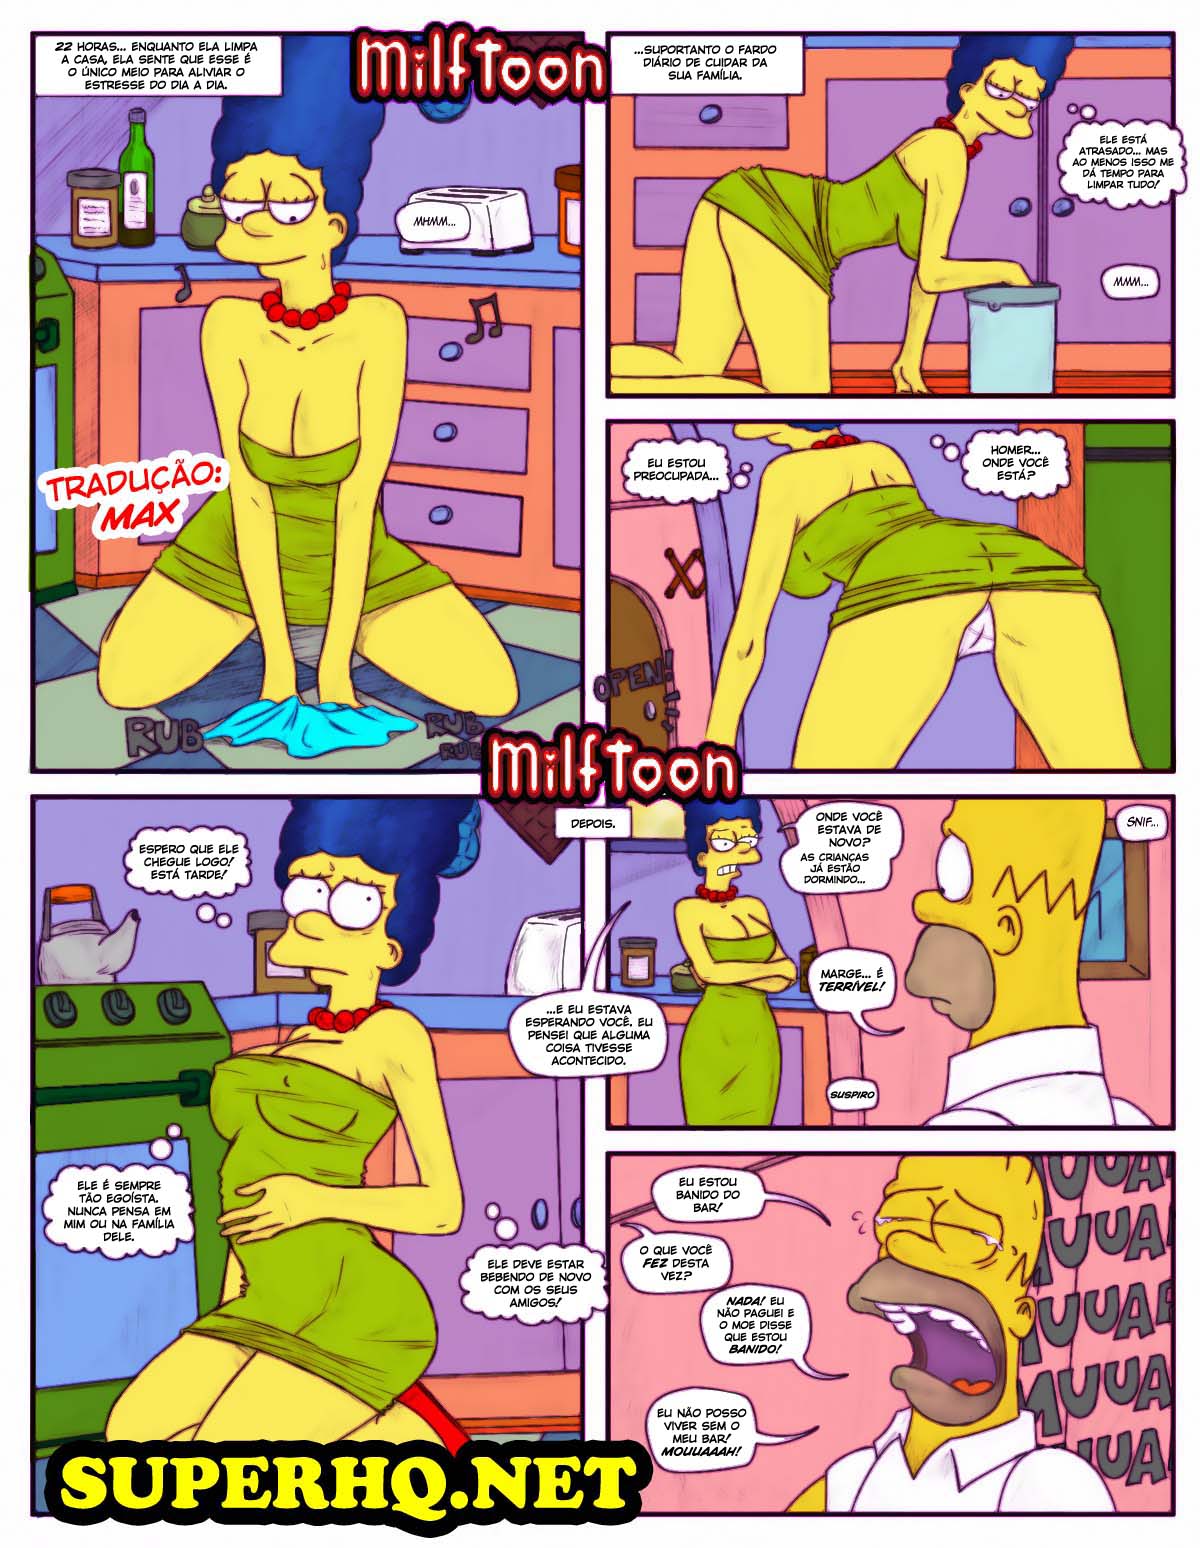 Milftoon - Os Simpsons - Foto 1